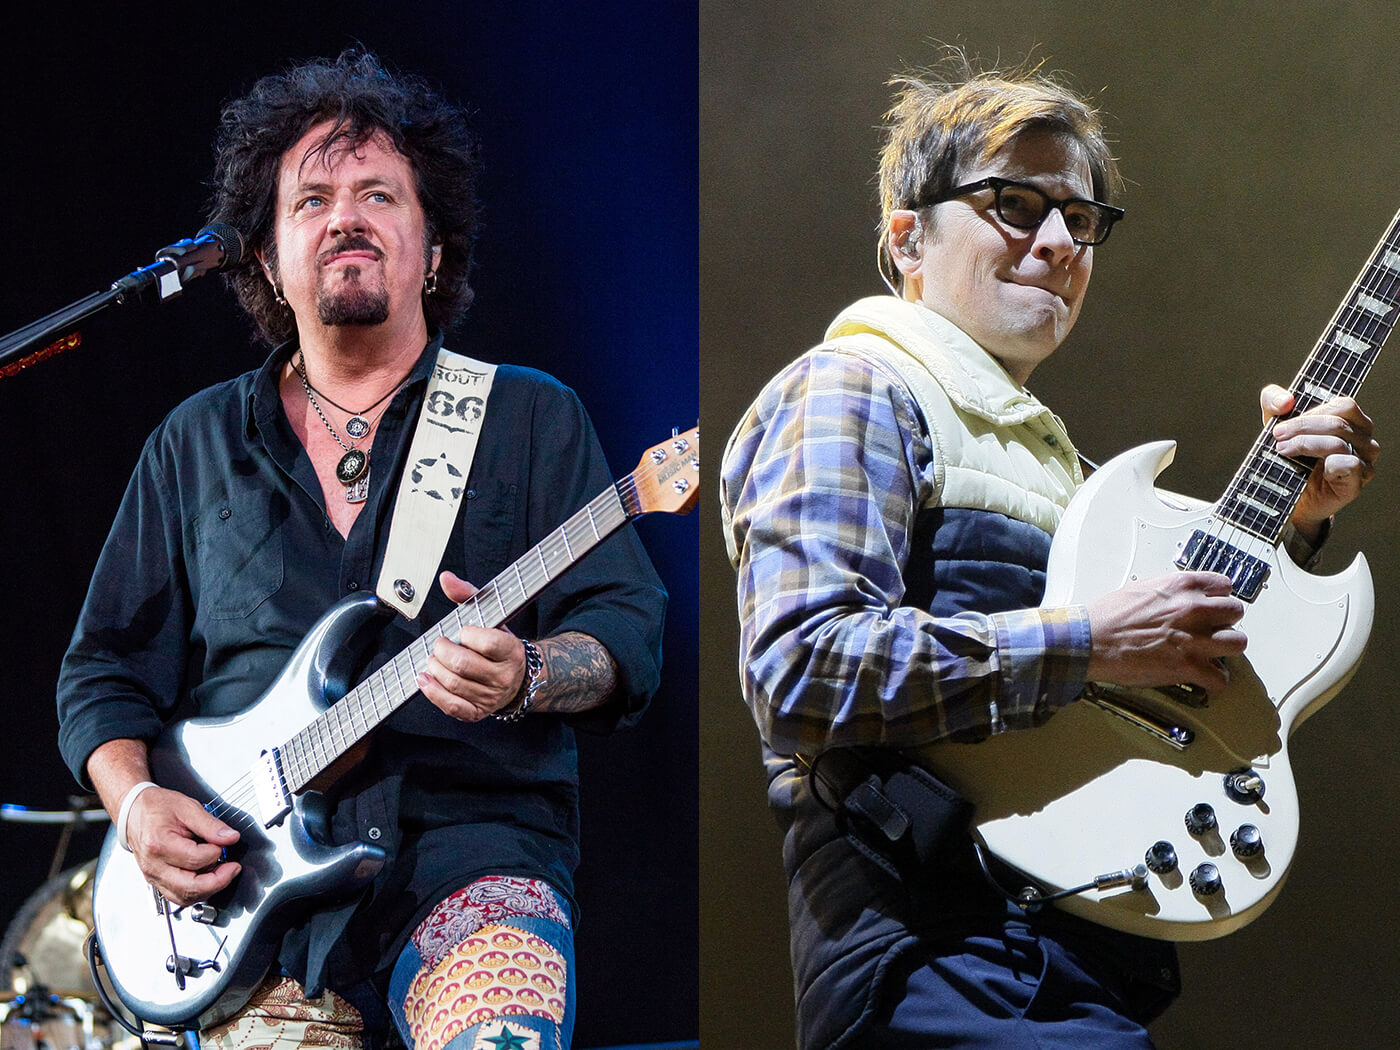 Steve Lukather / Rivers Cuomo